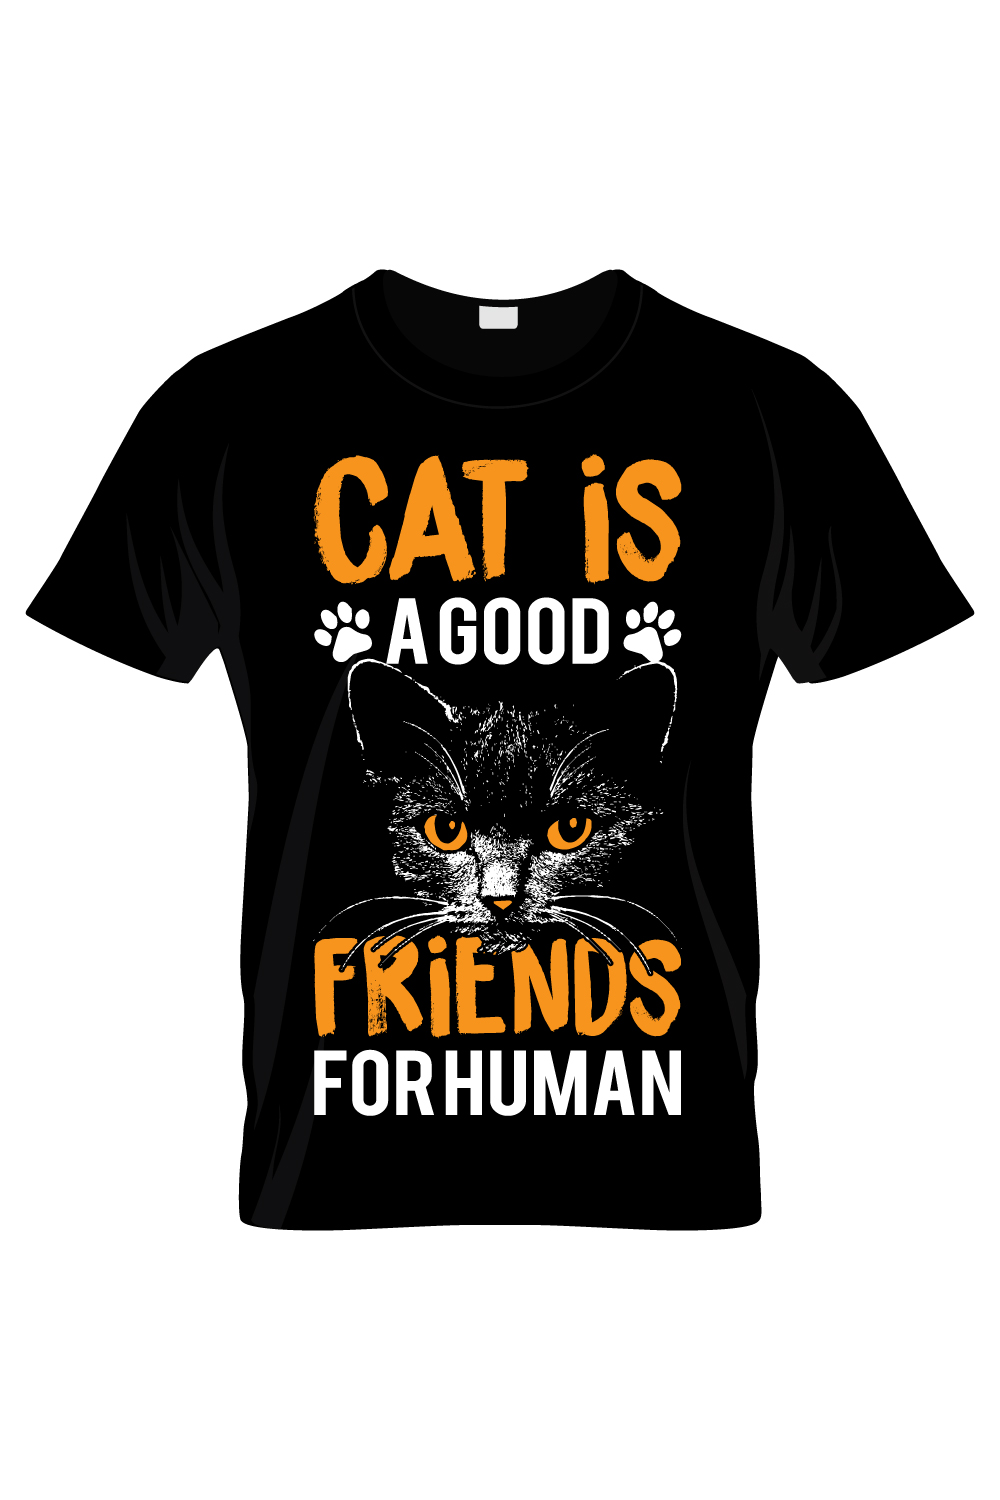 Image of a black T-shirt with an enchanting cat print